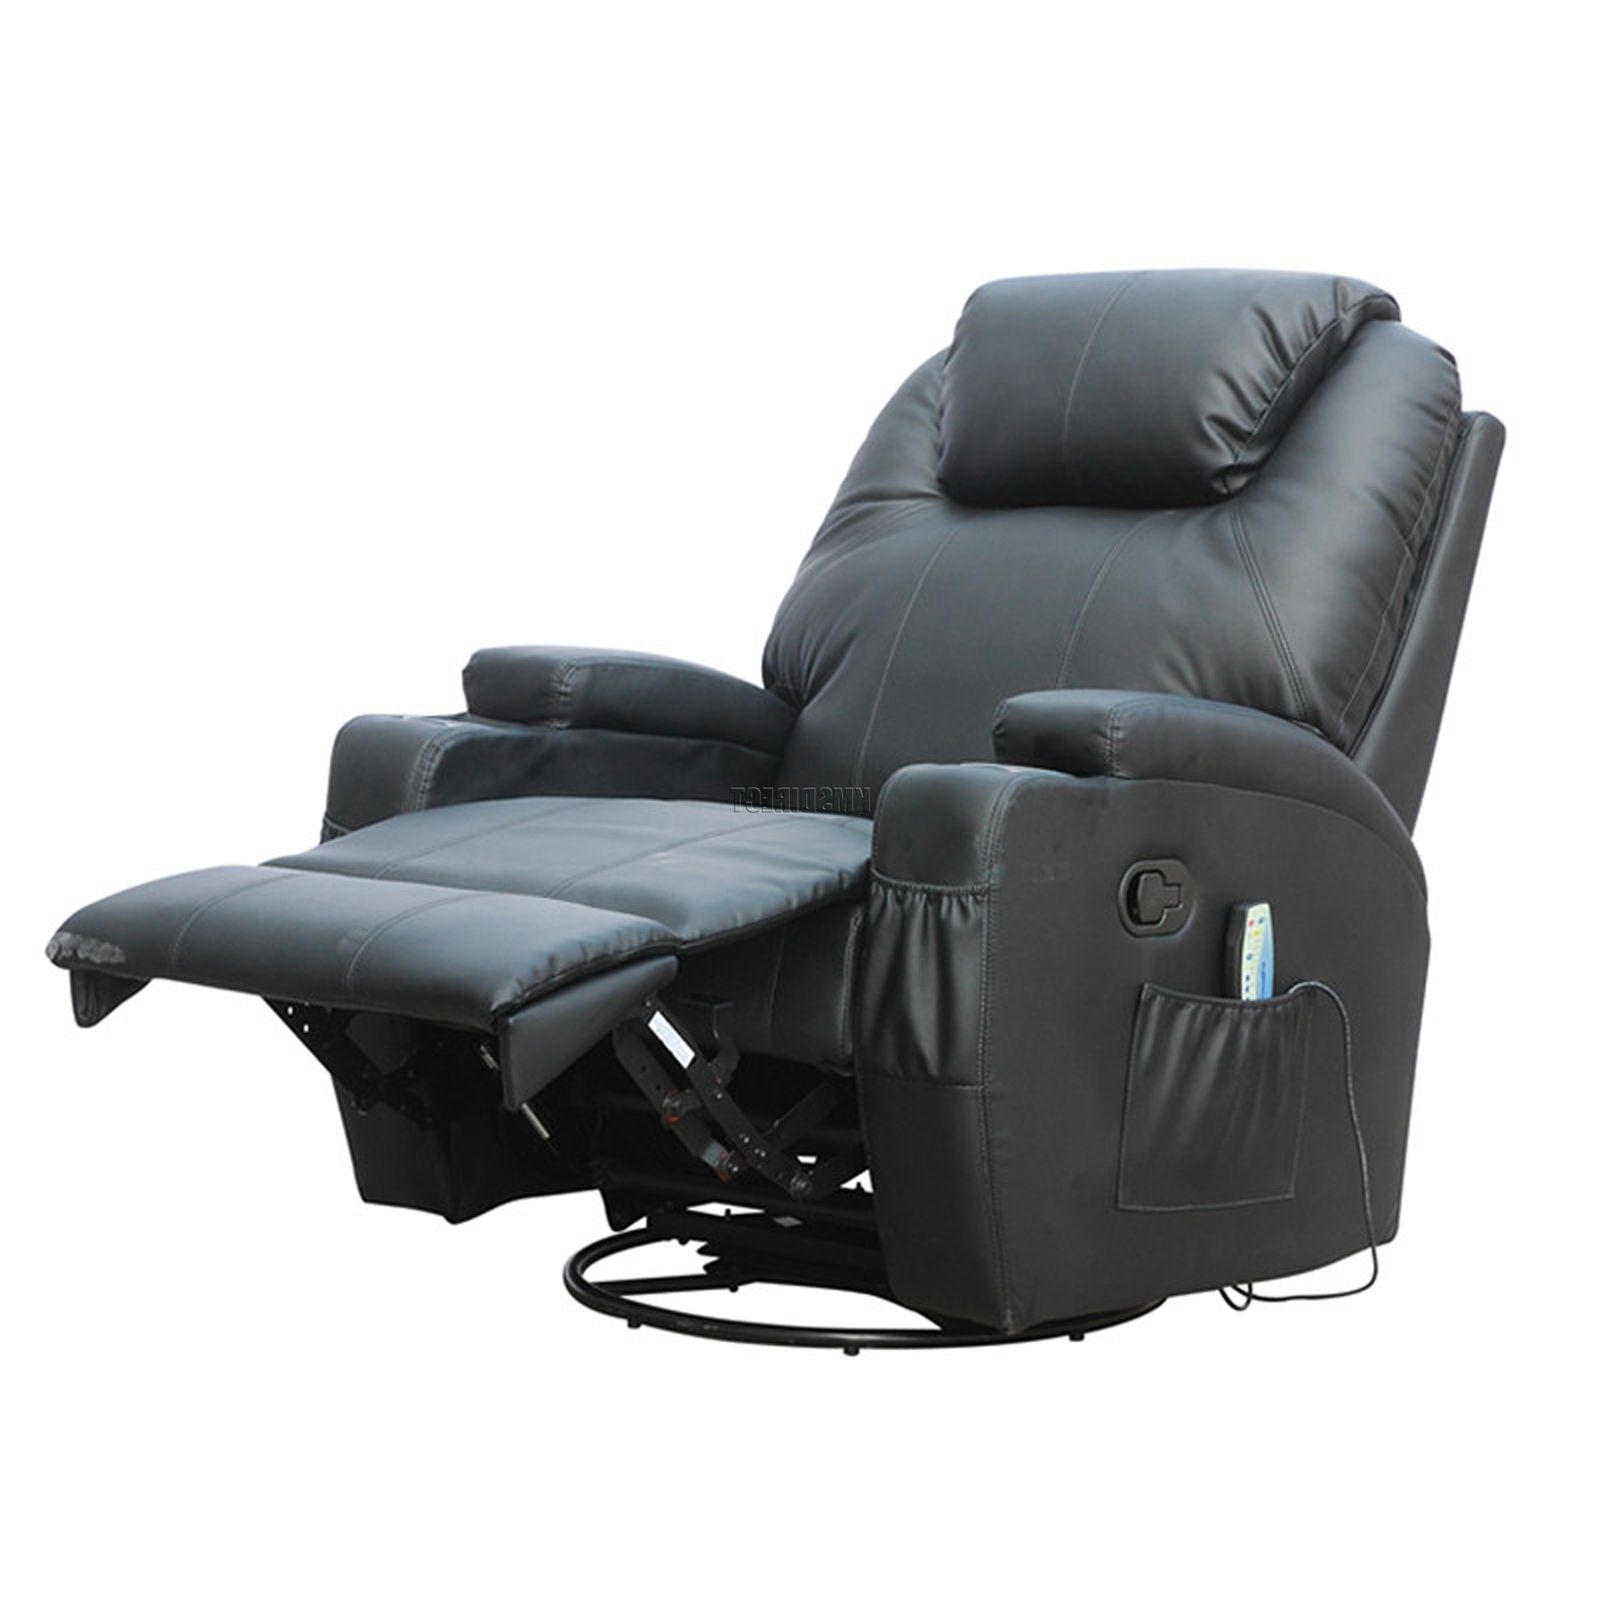 2018 Sofa Chair Recliner In Ex Demo Black Bonded Leather Massage Cinema Recliner Sofa Chair (View 1 of 20)